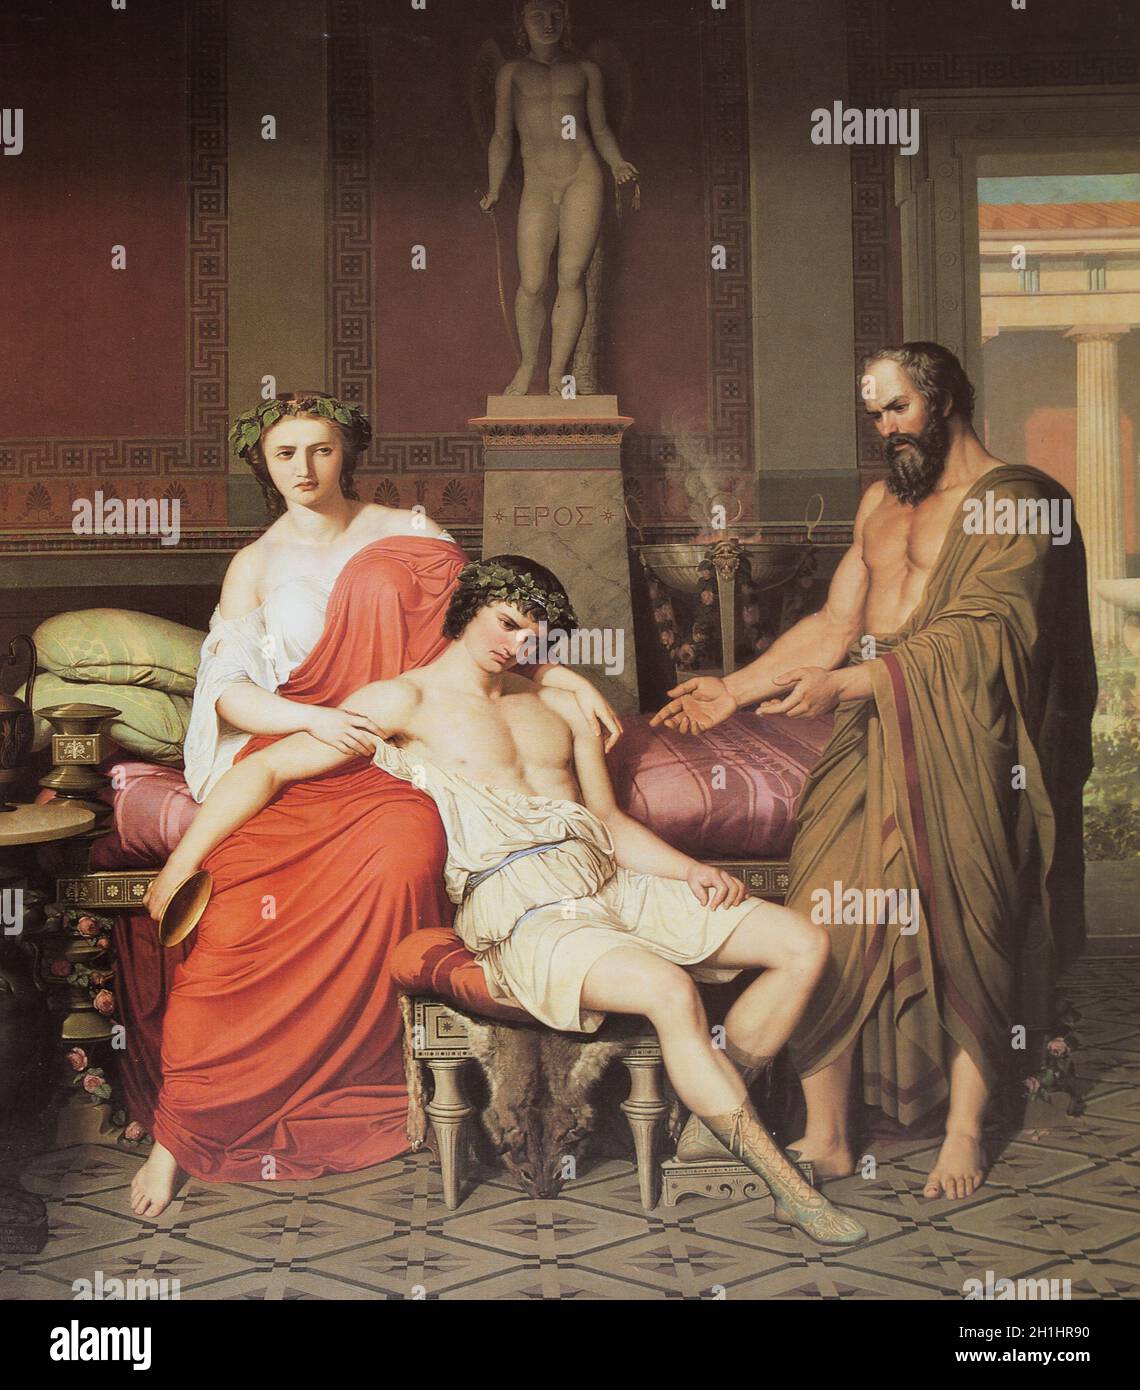 Socrates chiding Alcibiades in Home of a Courtesan. Painted by German Amores Hernandez in 1823. Museo del Prado, Madrid Stock Photo